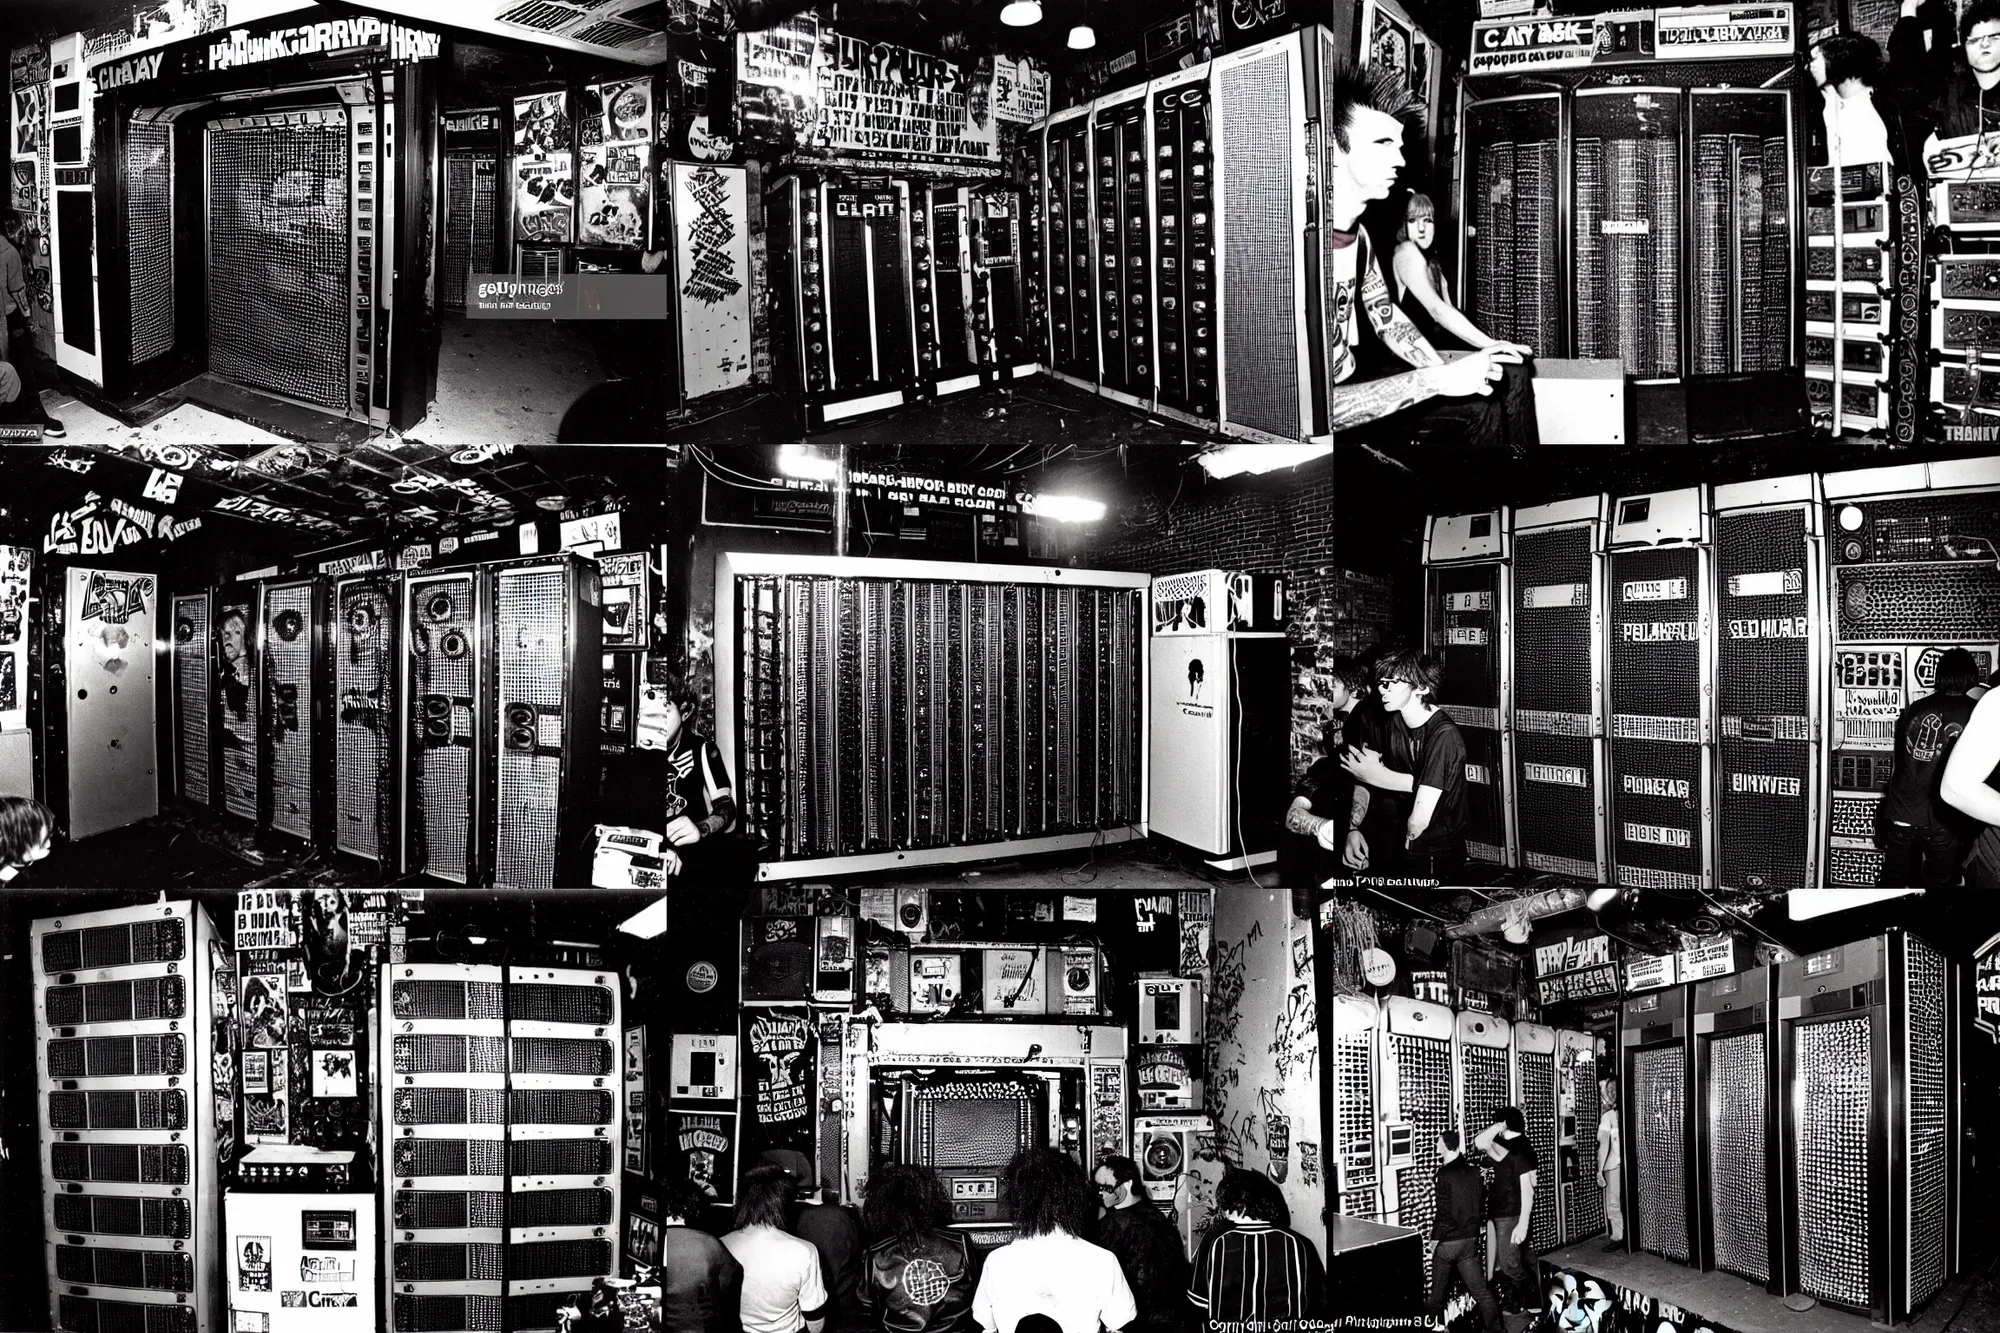 Prompt: the cray - 1 supercomputer at the punk club cbgb in new york city in the seventies, enjoying a live hardcore concert with the boys, many beers, very punk, total hardcore, loud, energetic, iconic hairstyles